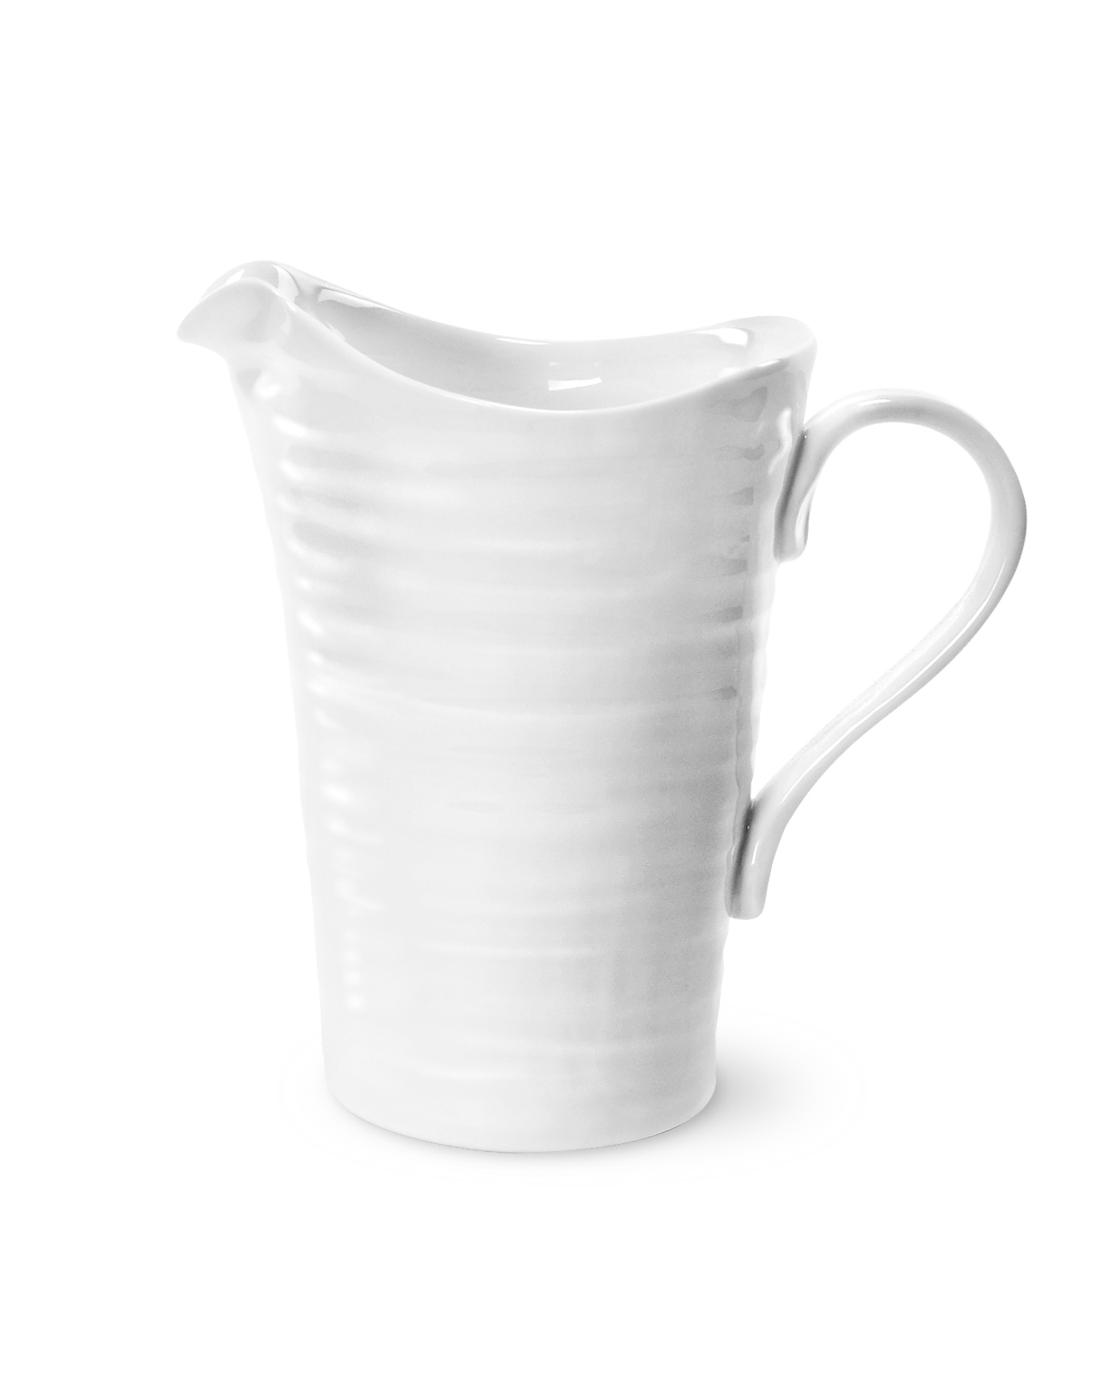 Sophie Conran for White Large Pitcher image number null